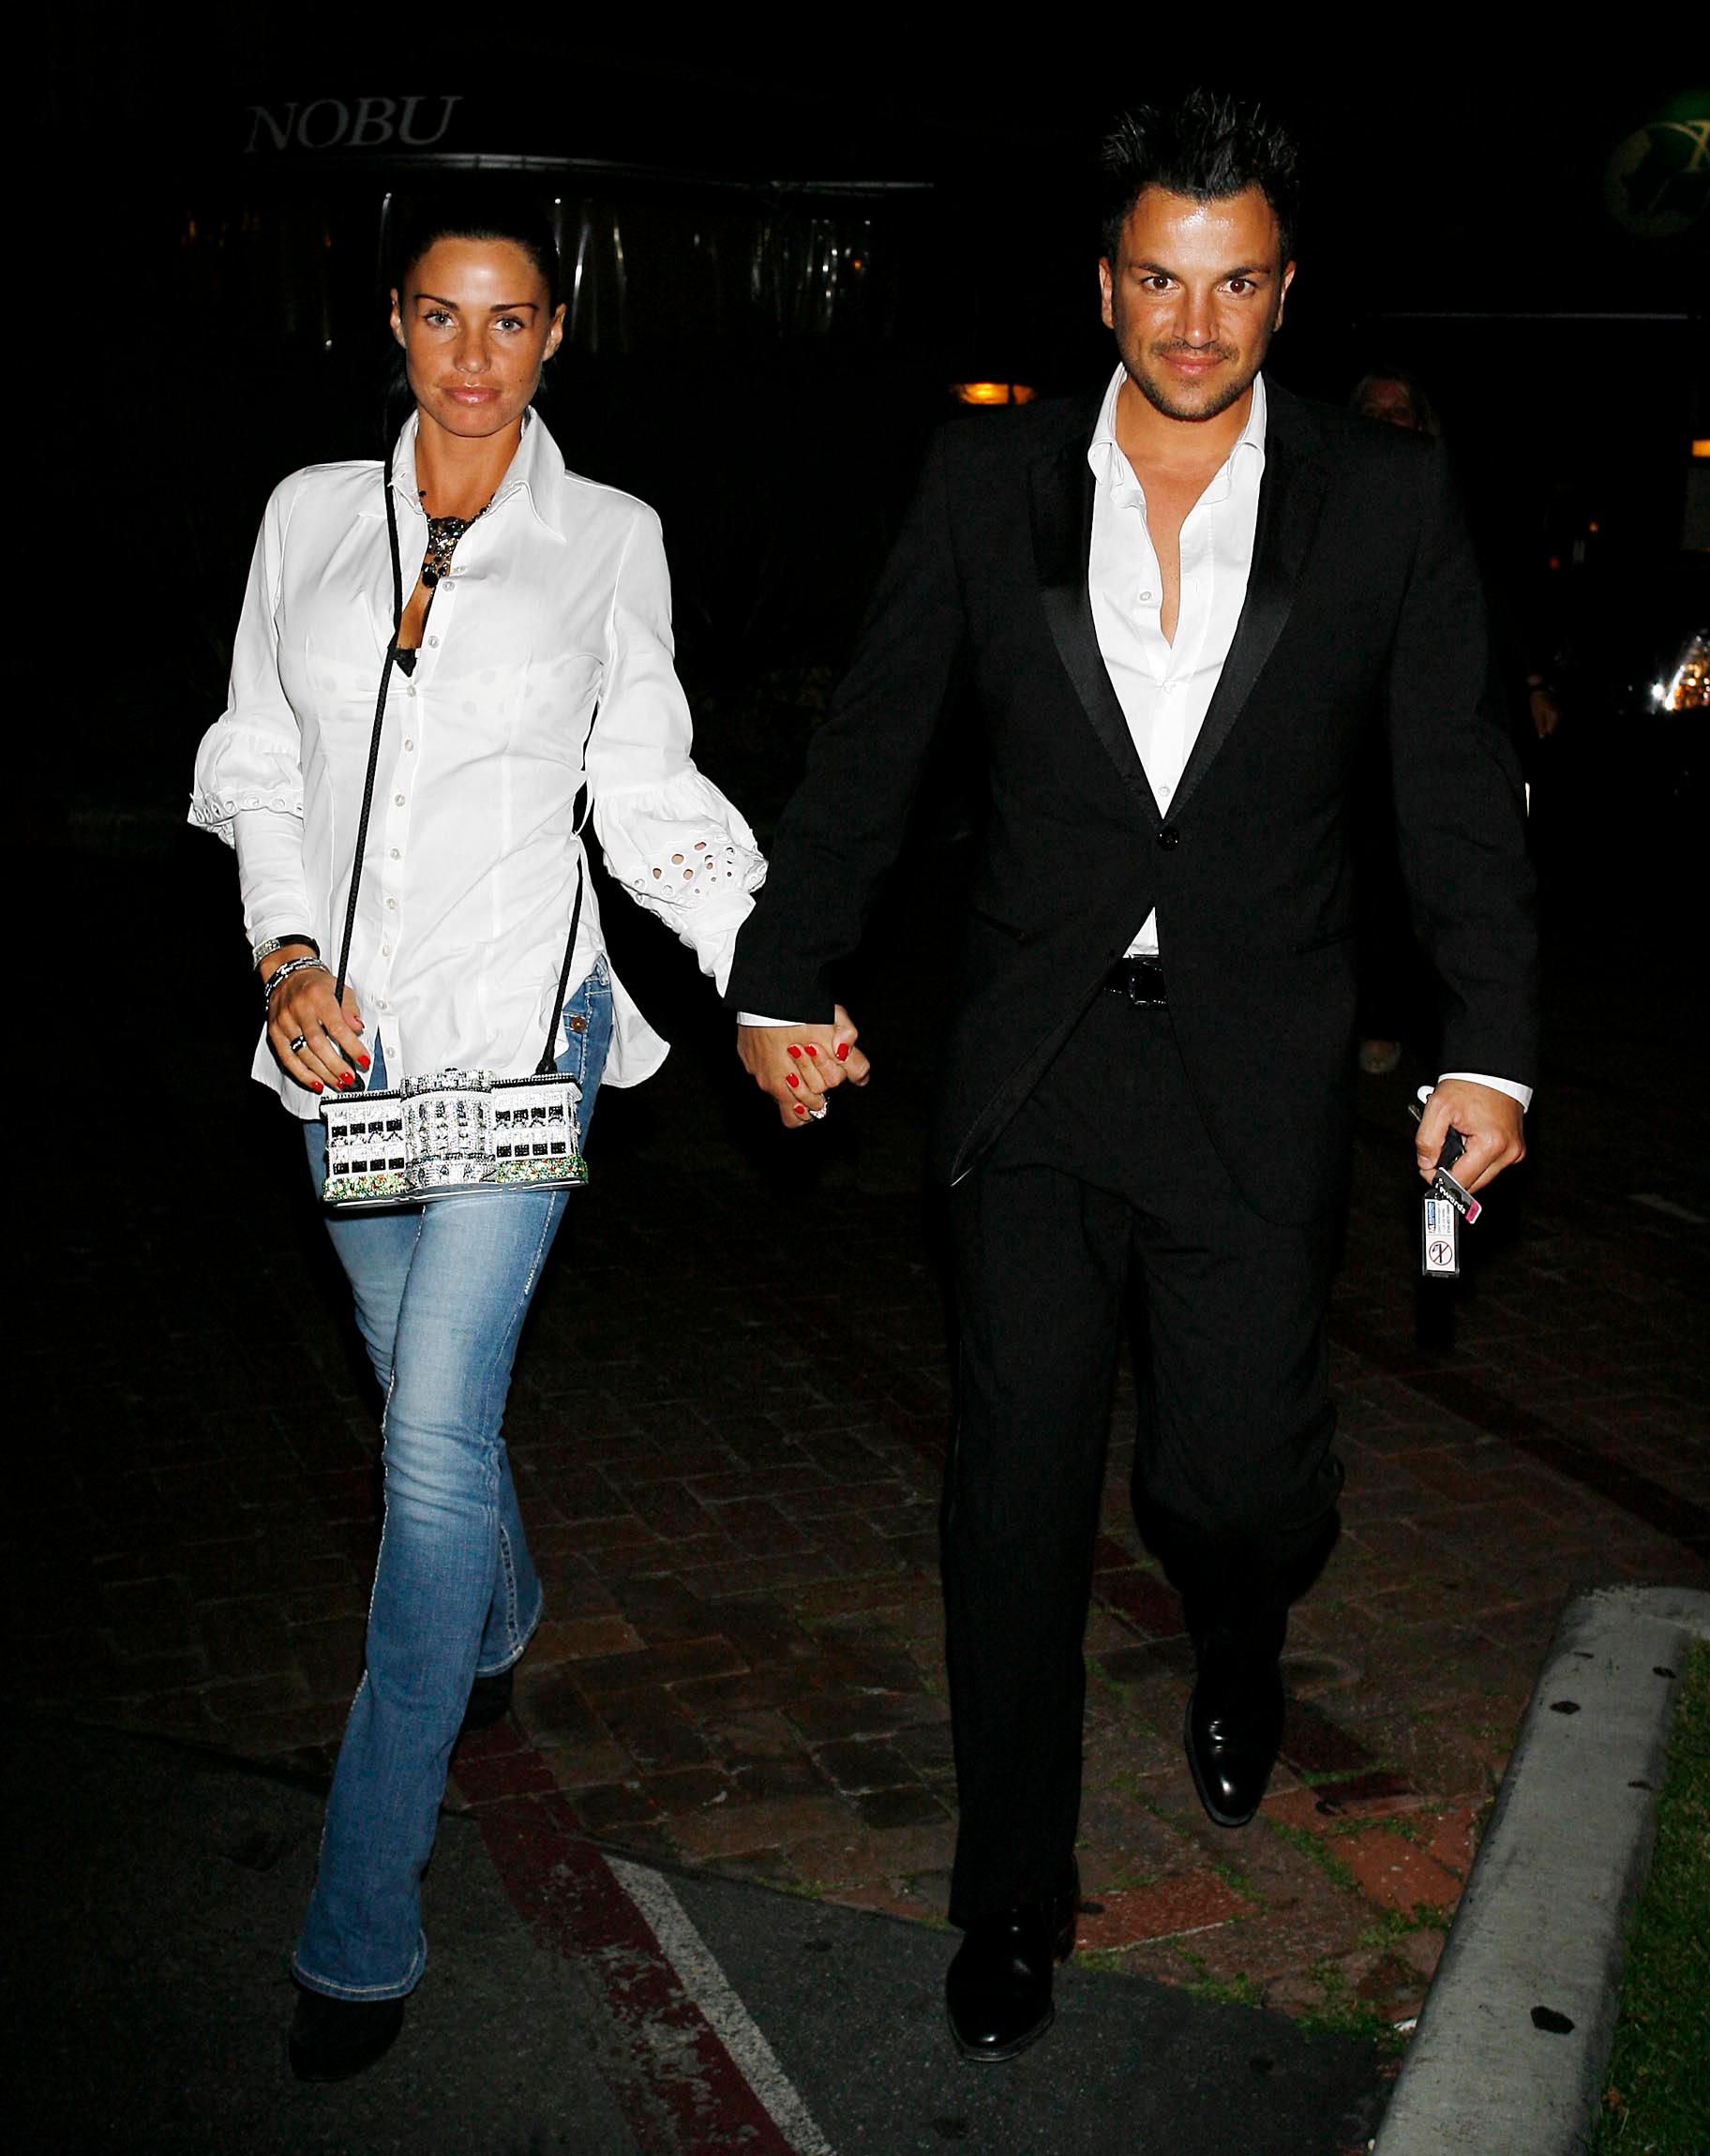 Katie Price and Peter Andre leaving Nobu